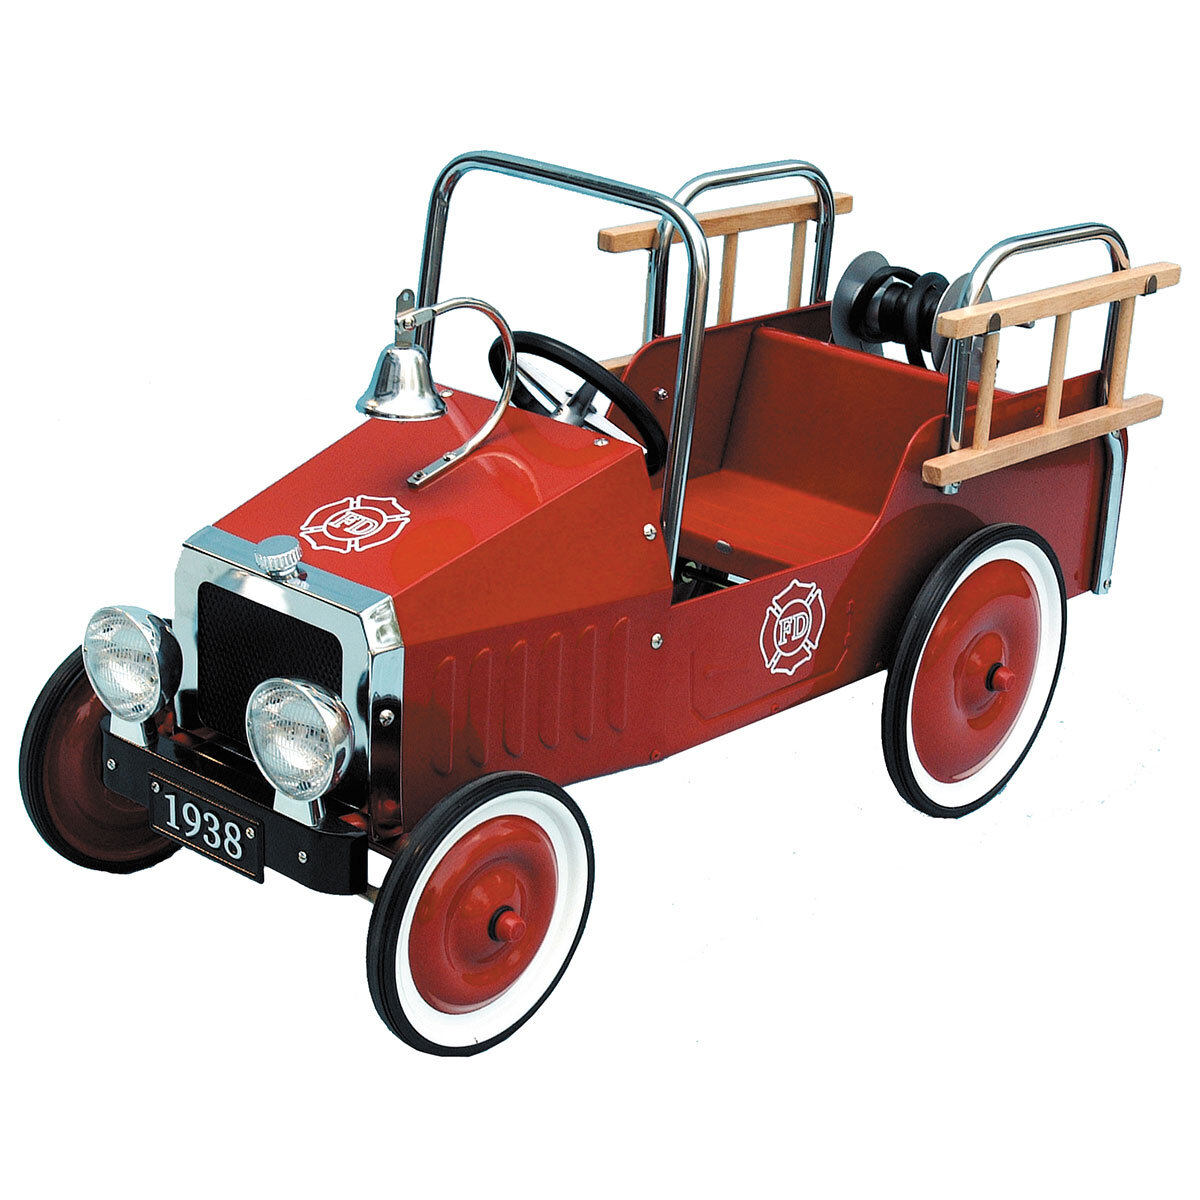 Buy Classic Pedal Car - Fire Engine Overview Image at Costco.co.uk